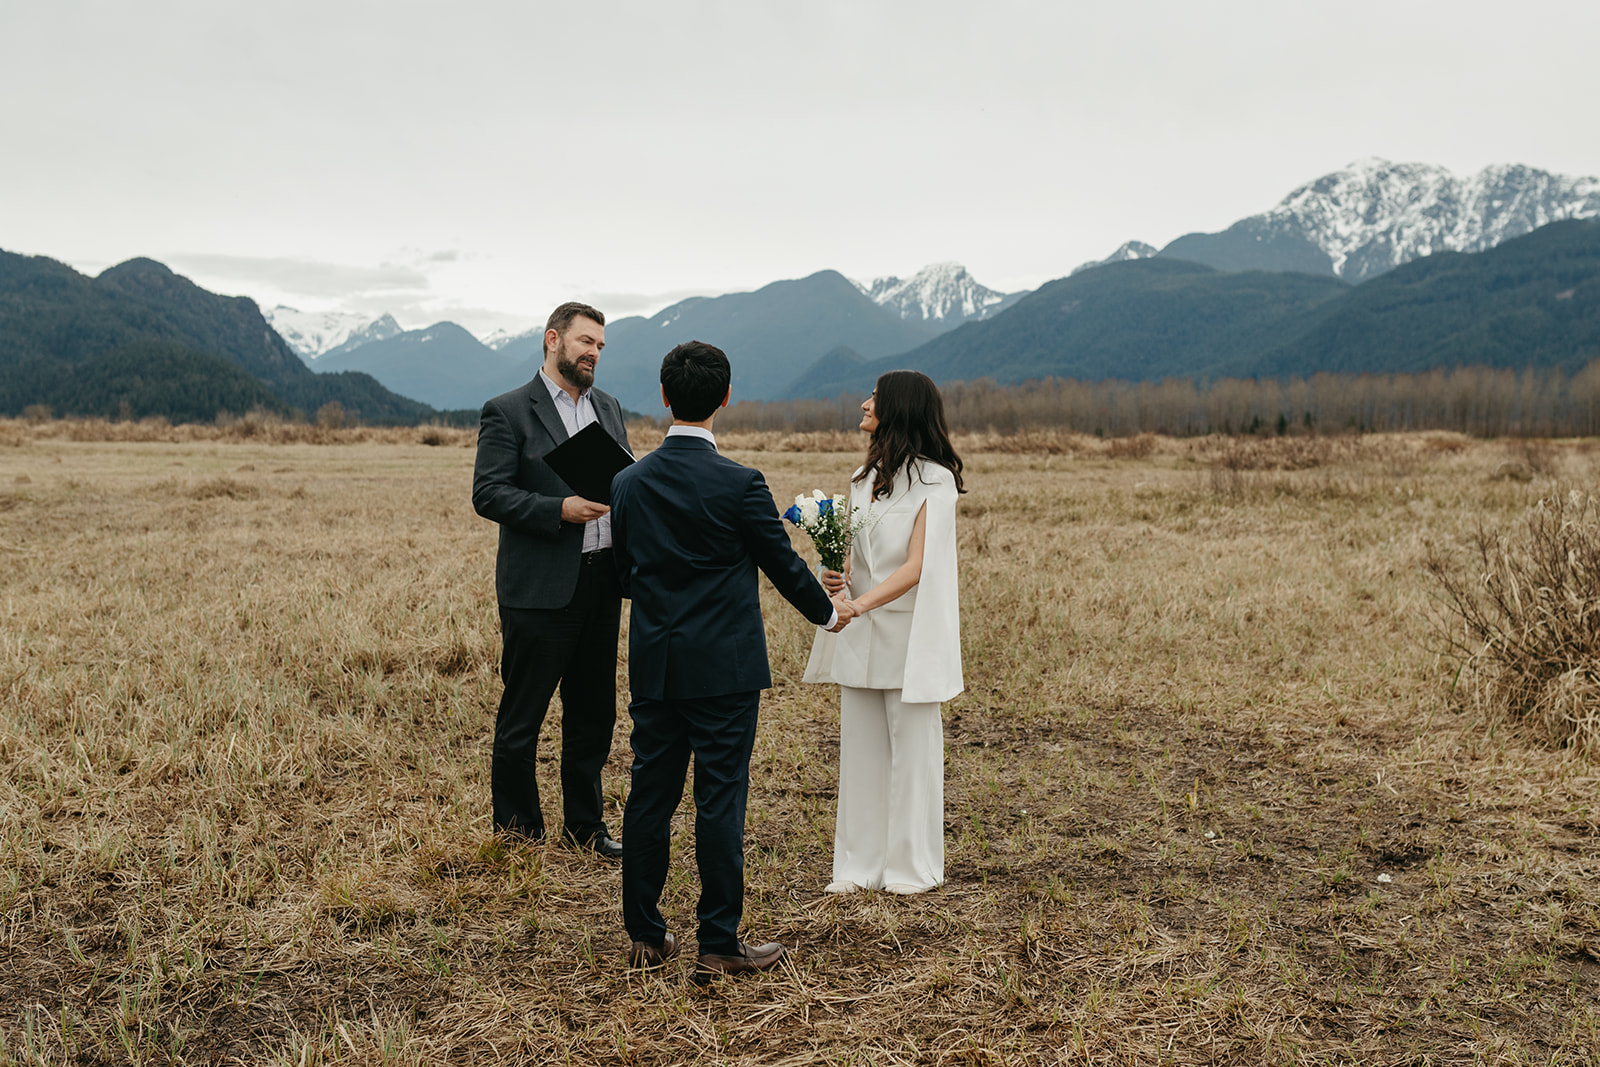 leave no trace at your outdoor elopement with young hip & married